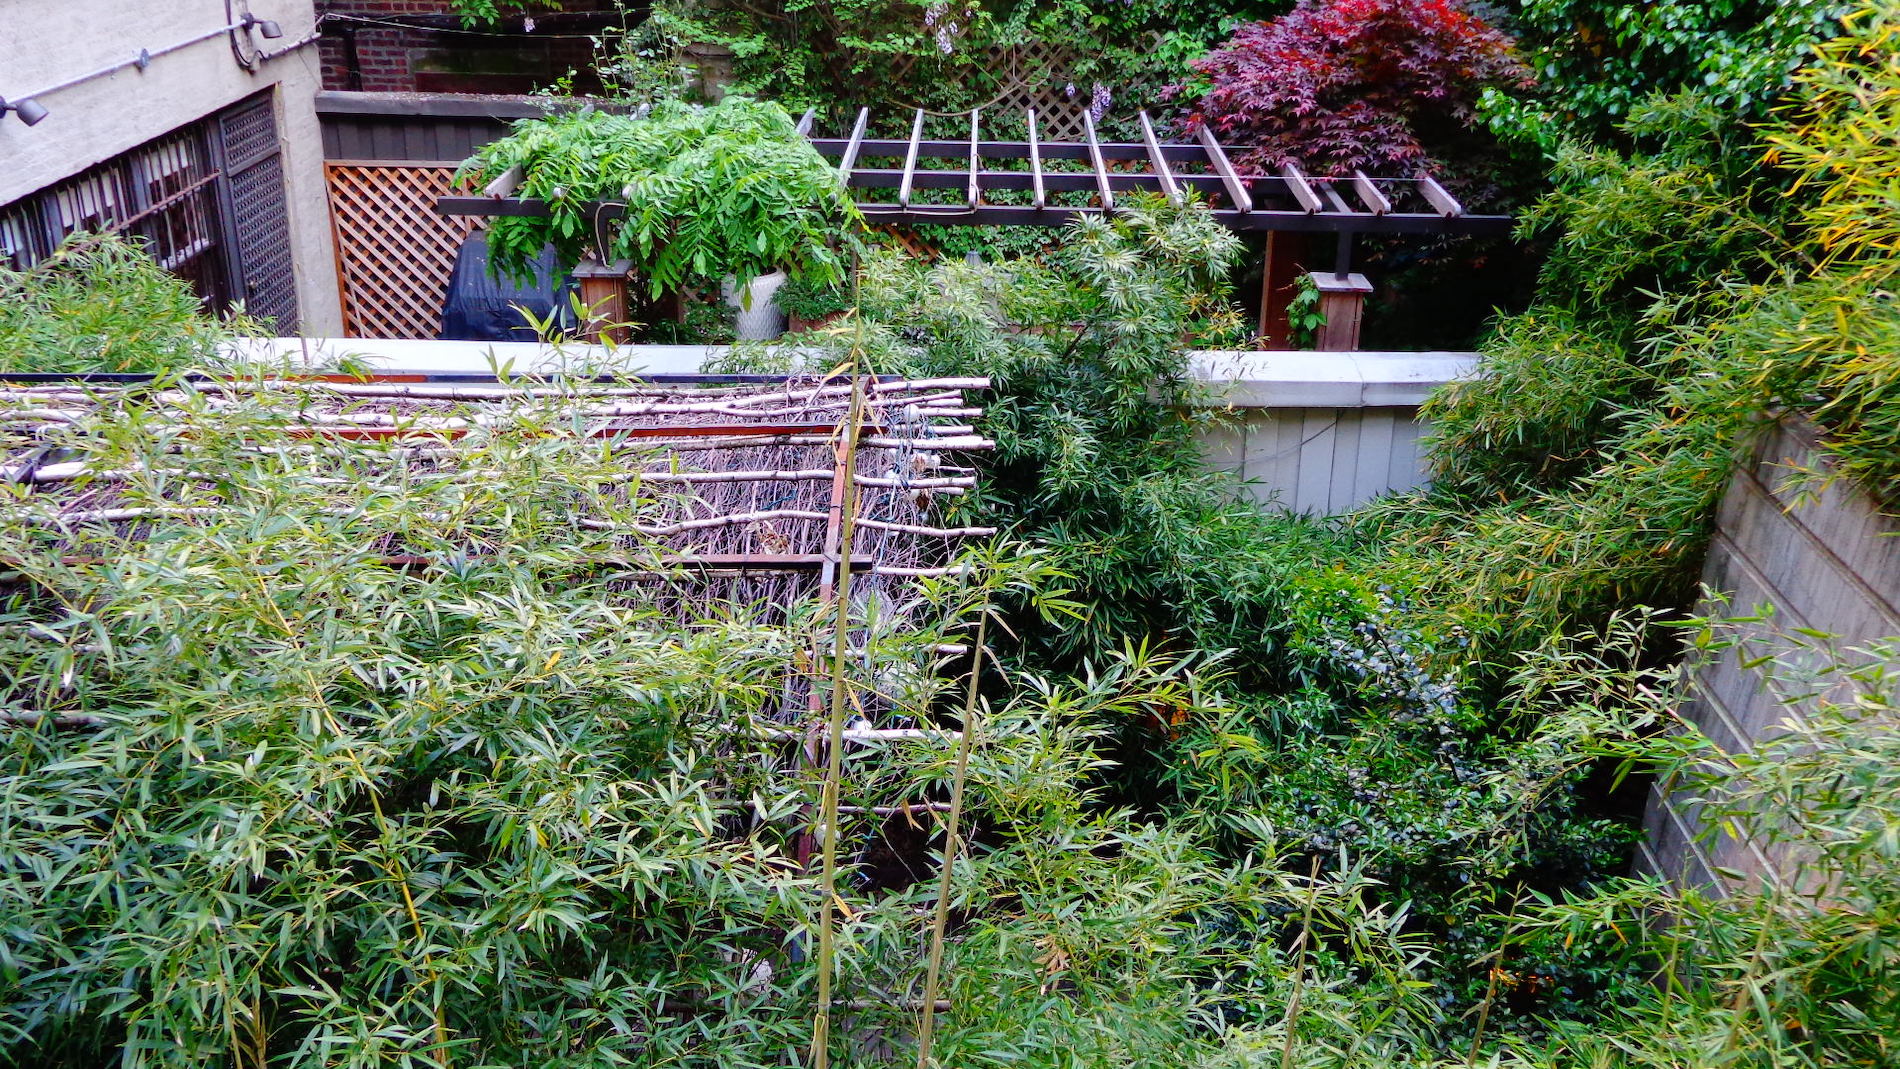 Neighboring Gardens with Bamboo and Trellises